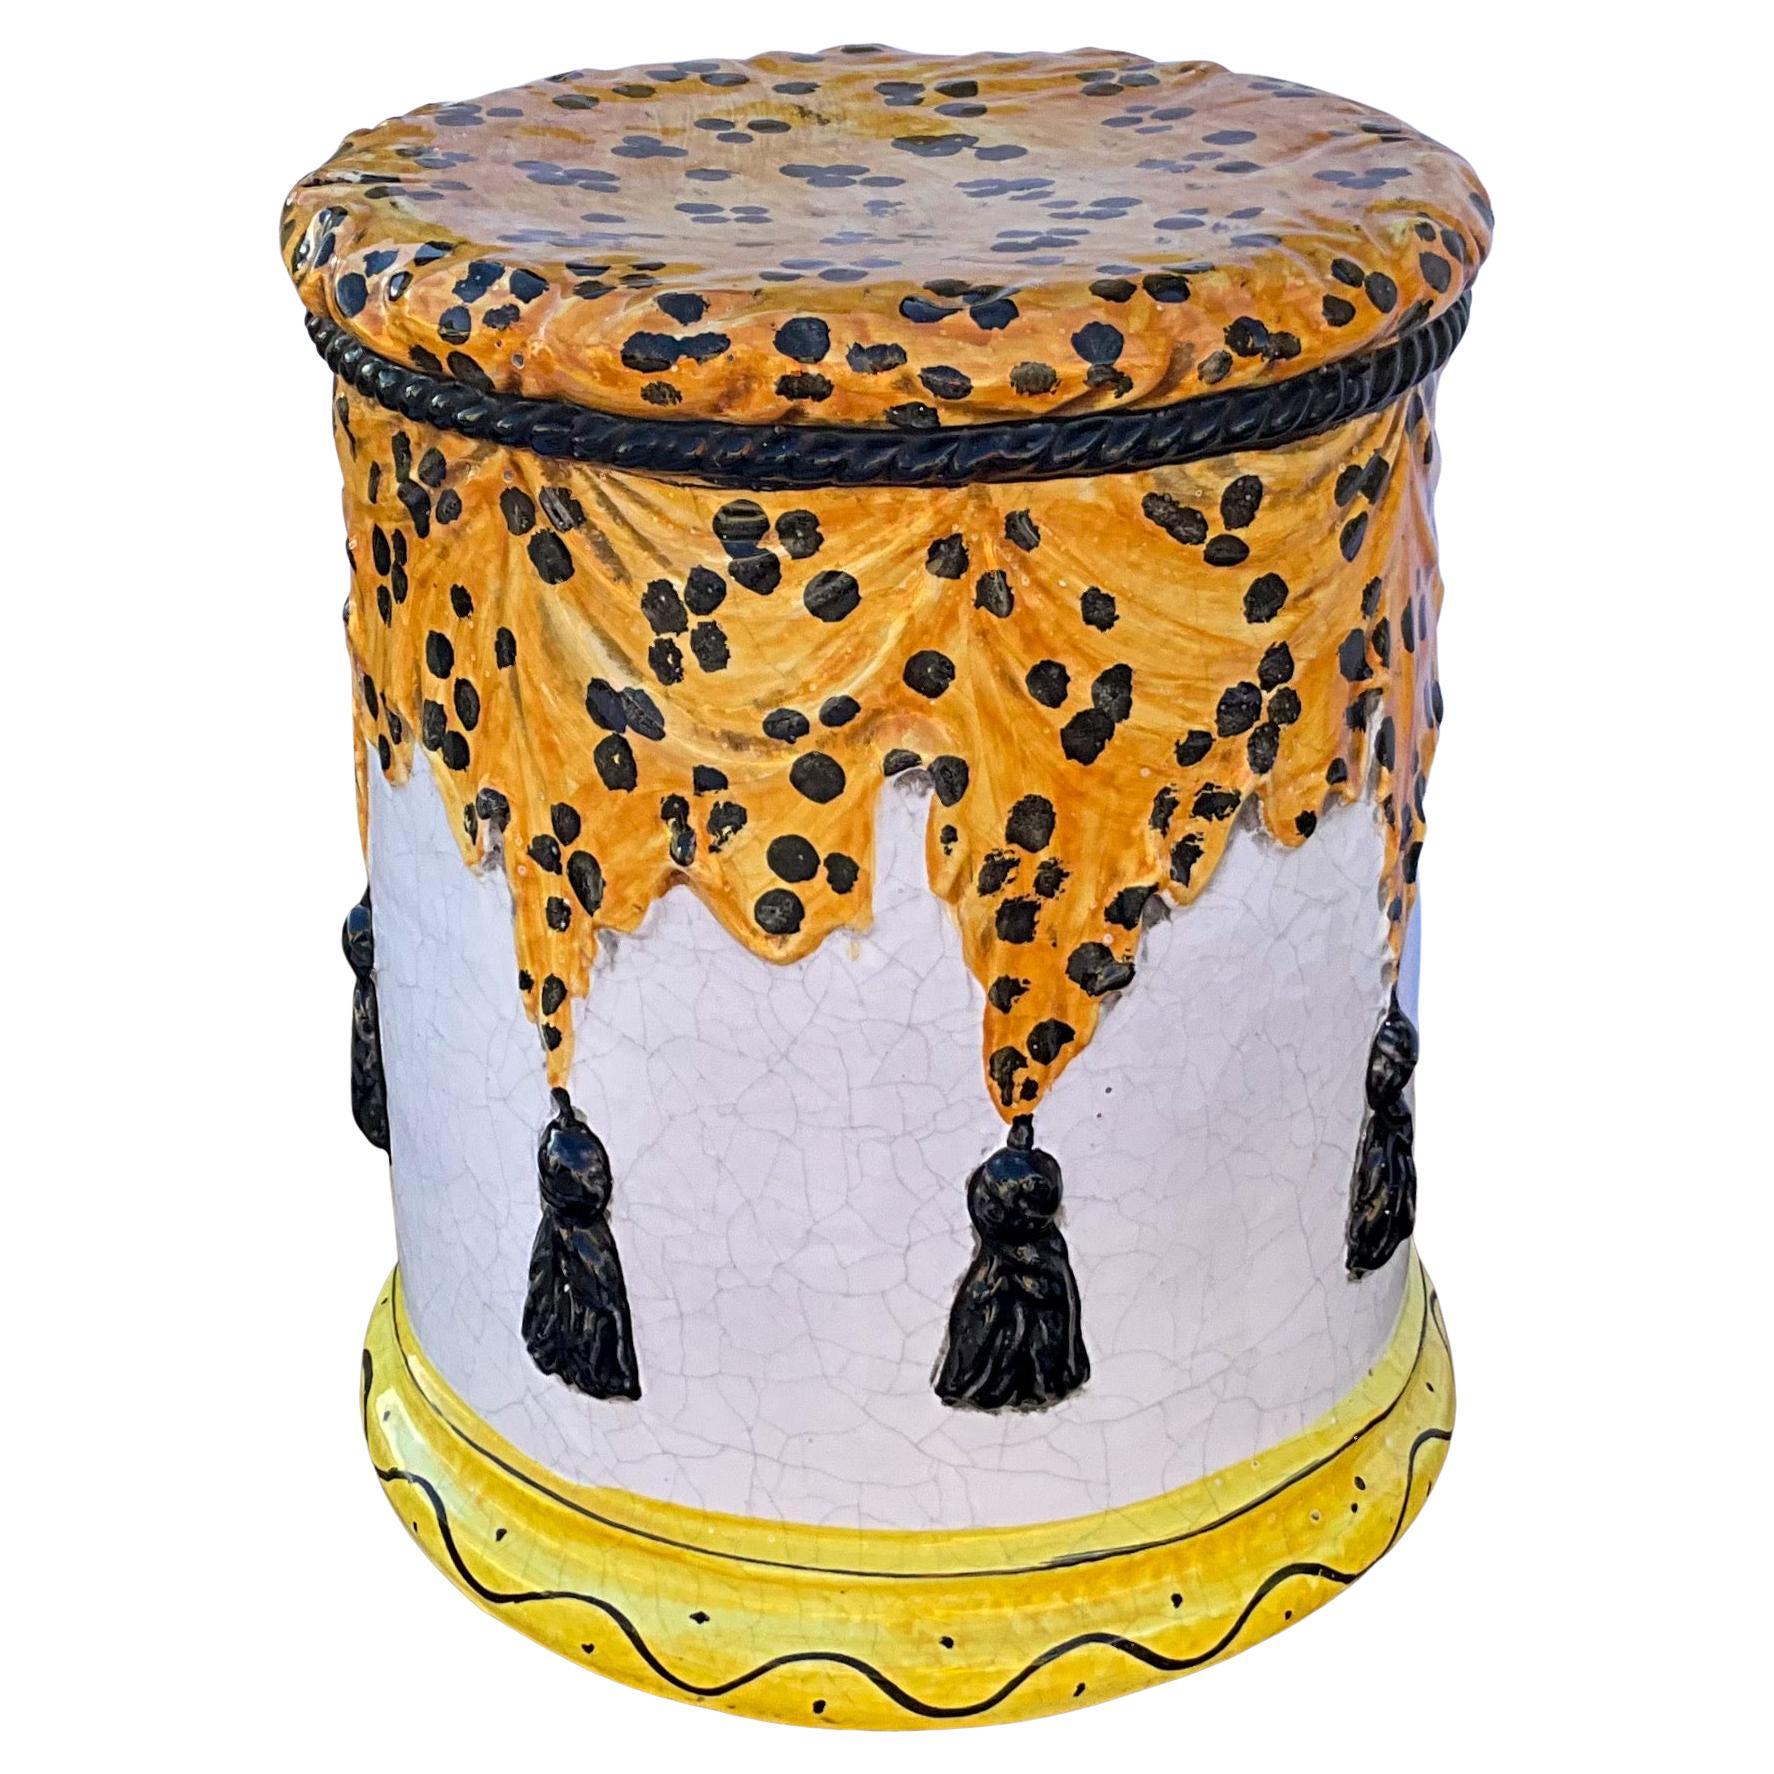 This is a Hollywood Regsncy leopard and tassel majolica garden stool. It is Italian and terracotta. It has lite crazing to the glaze.